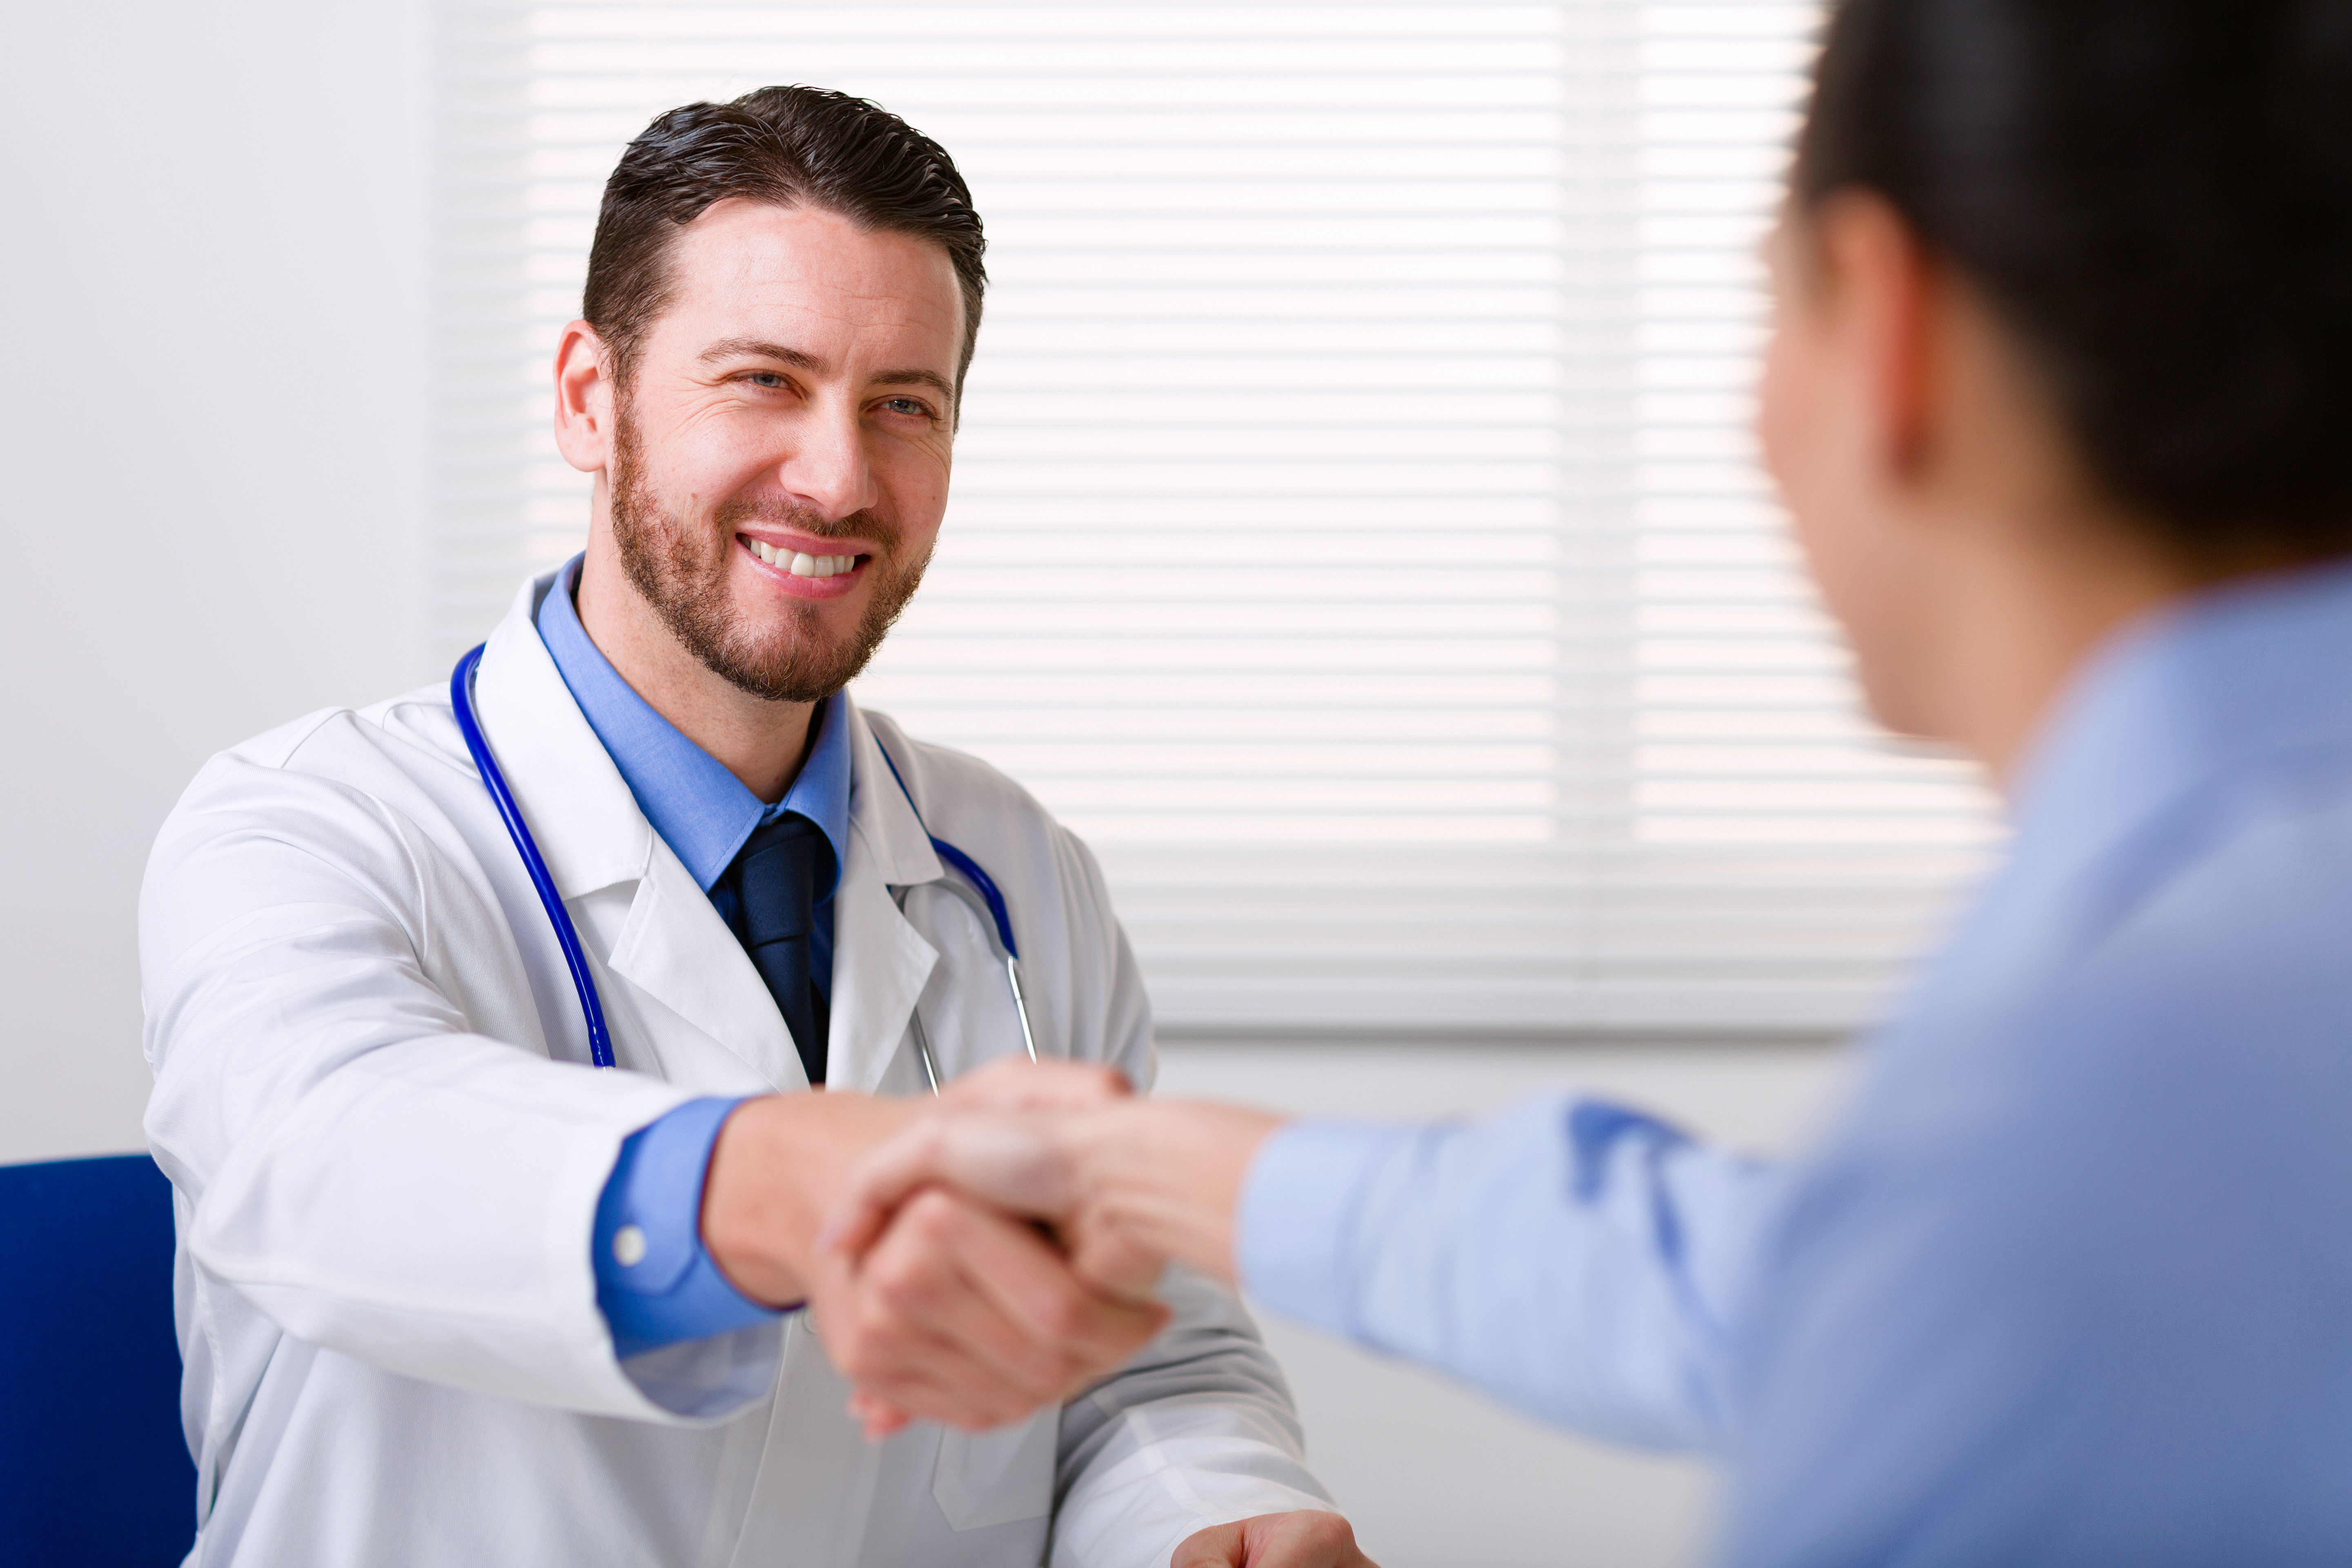 Male doctor in white coat smiling while shaking hand to woman. | Source: Shutterstock